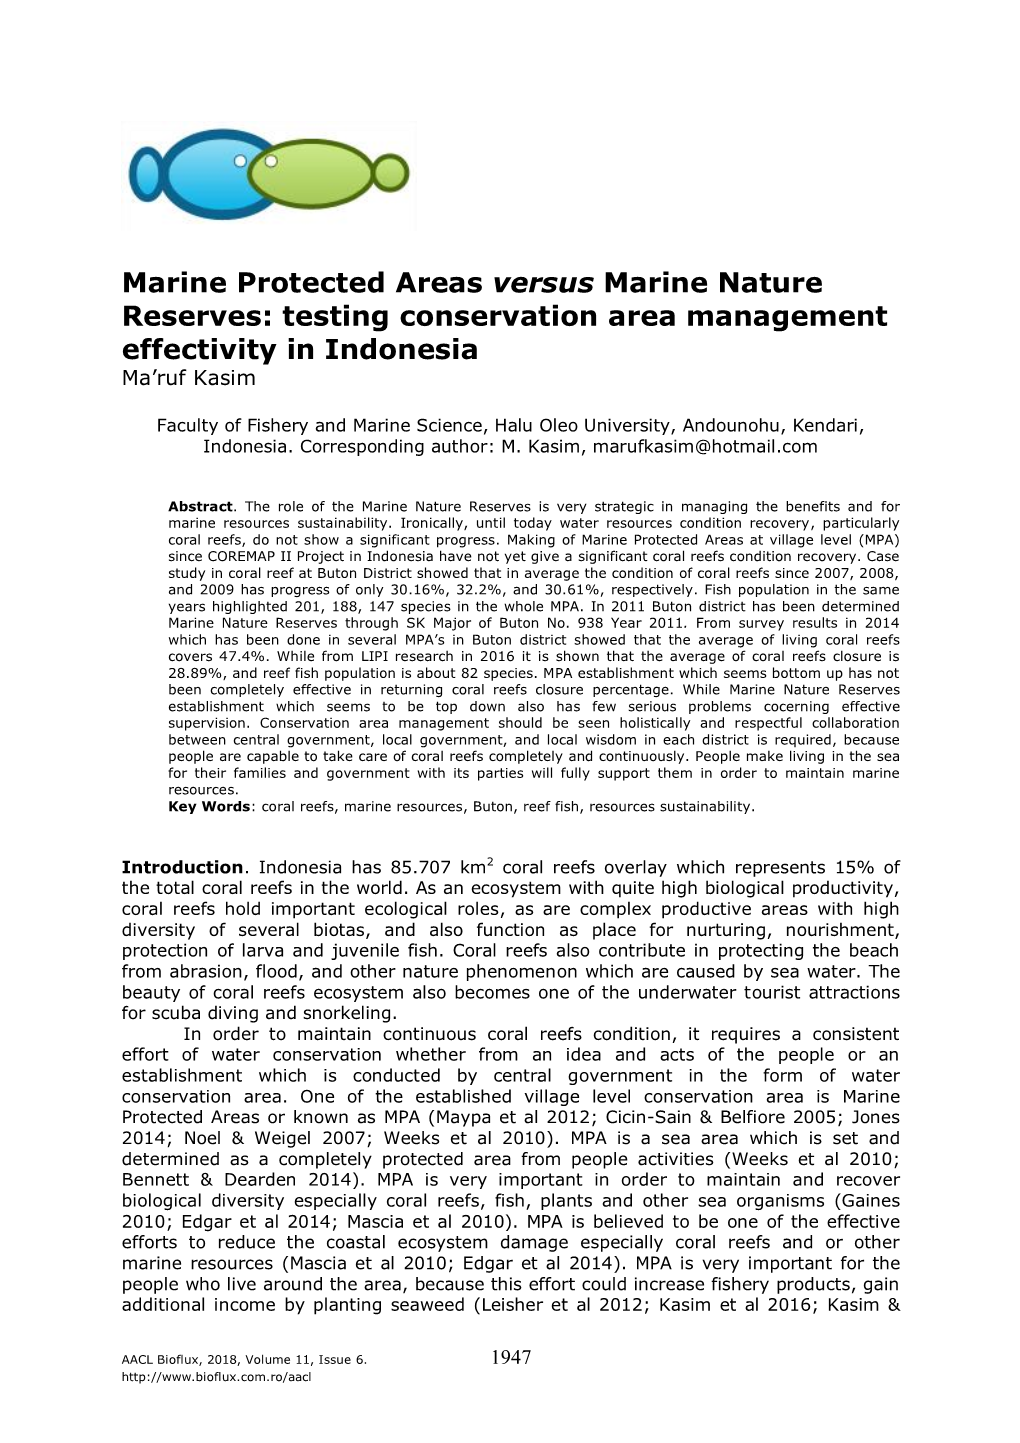 Kasim M., 2018 Marine Protected Areas Versus Marine Nature Reserves: Testing Conservation Area Management Effectivity in Indonesia